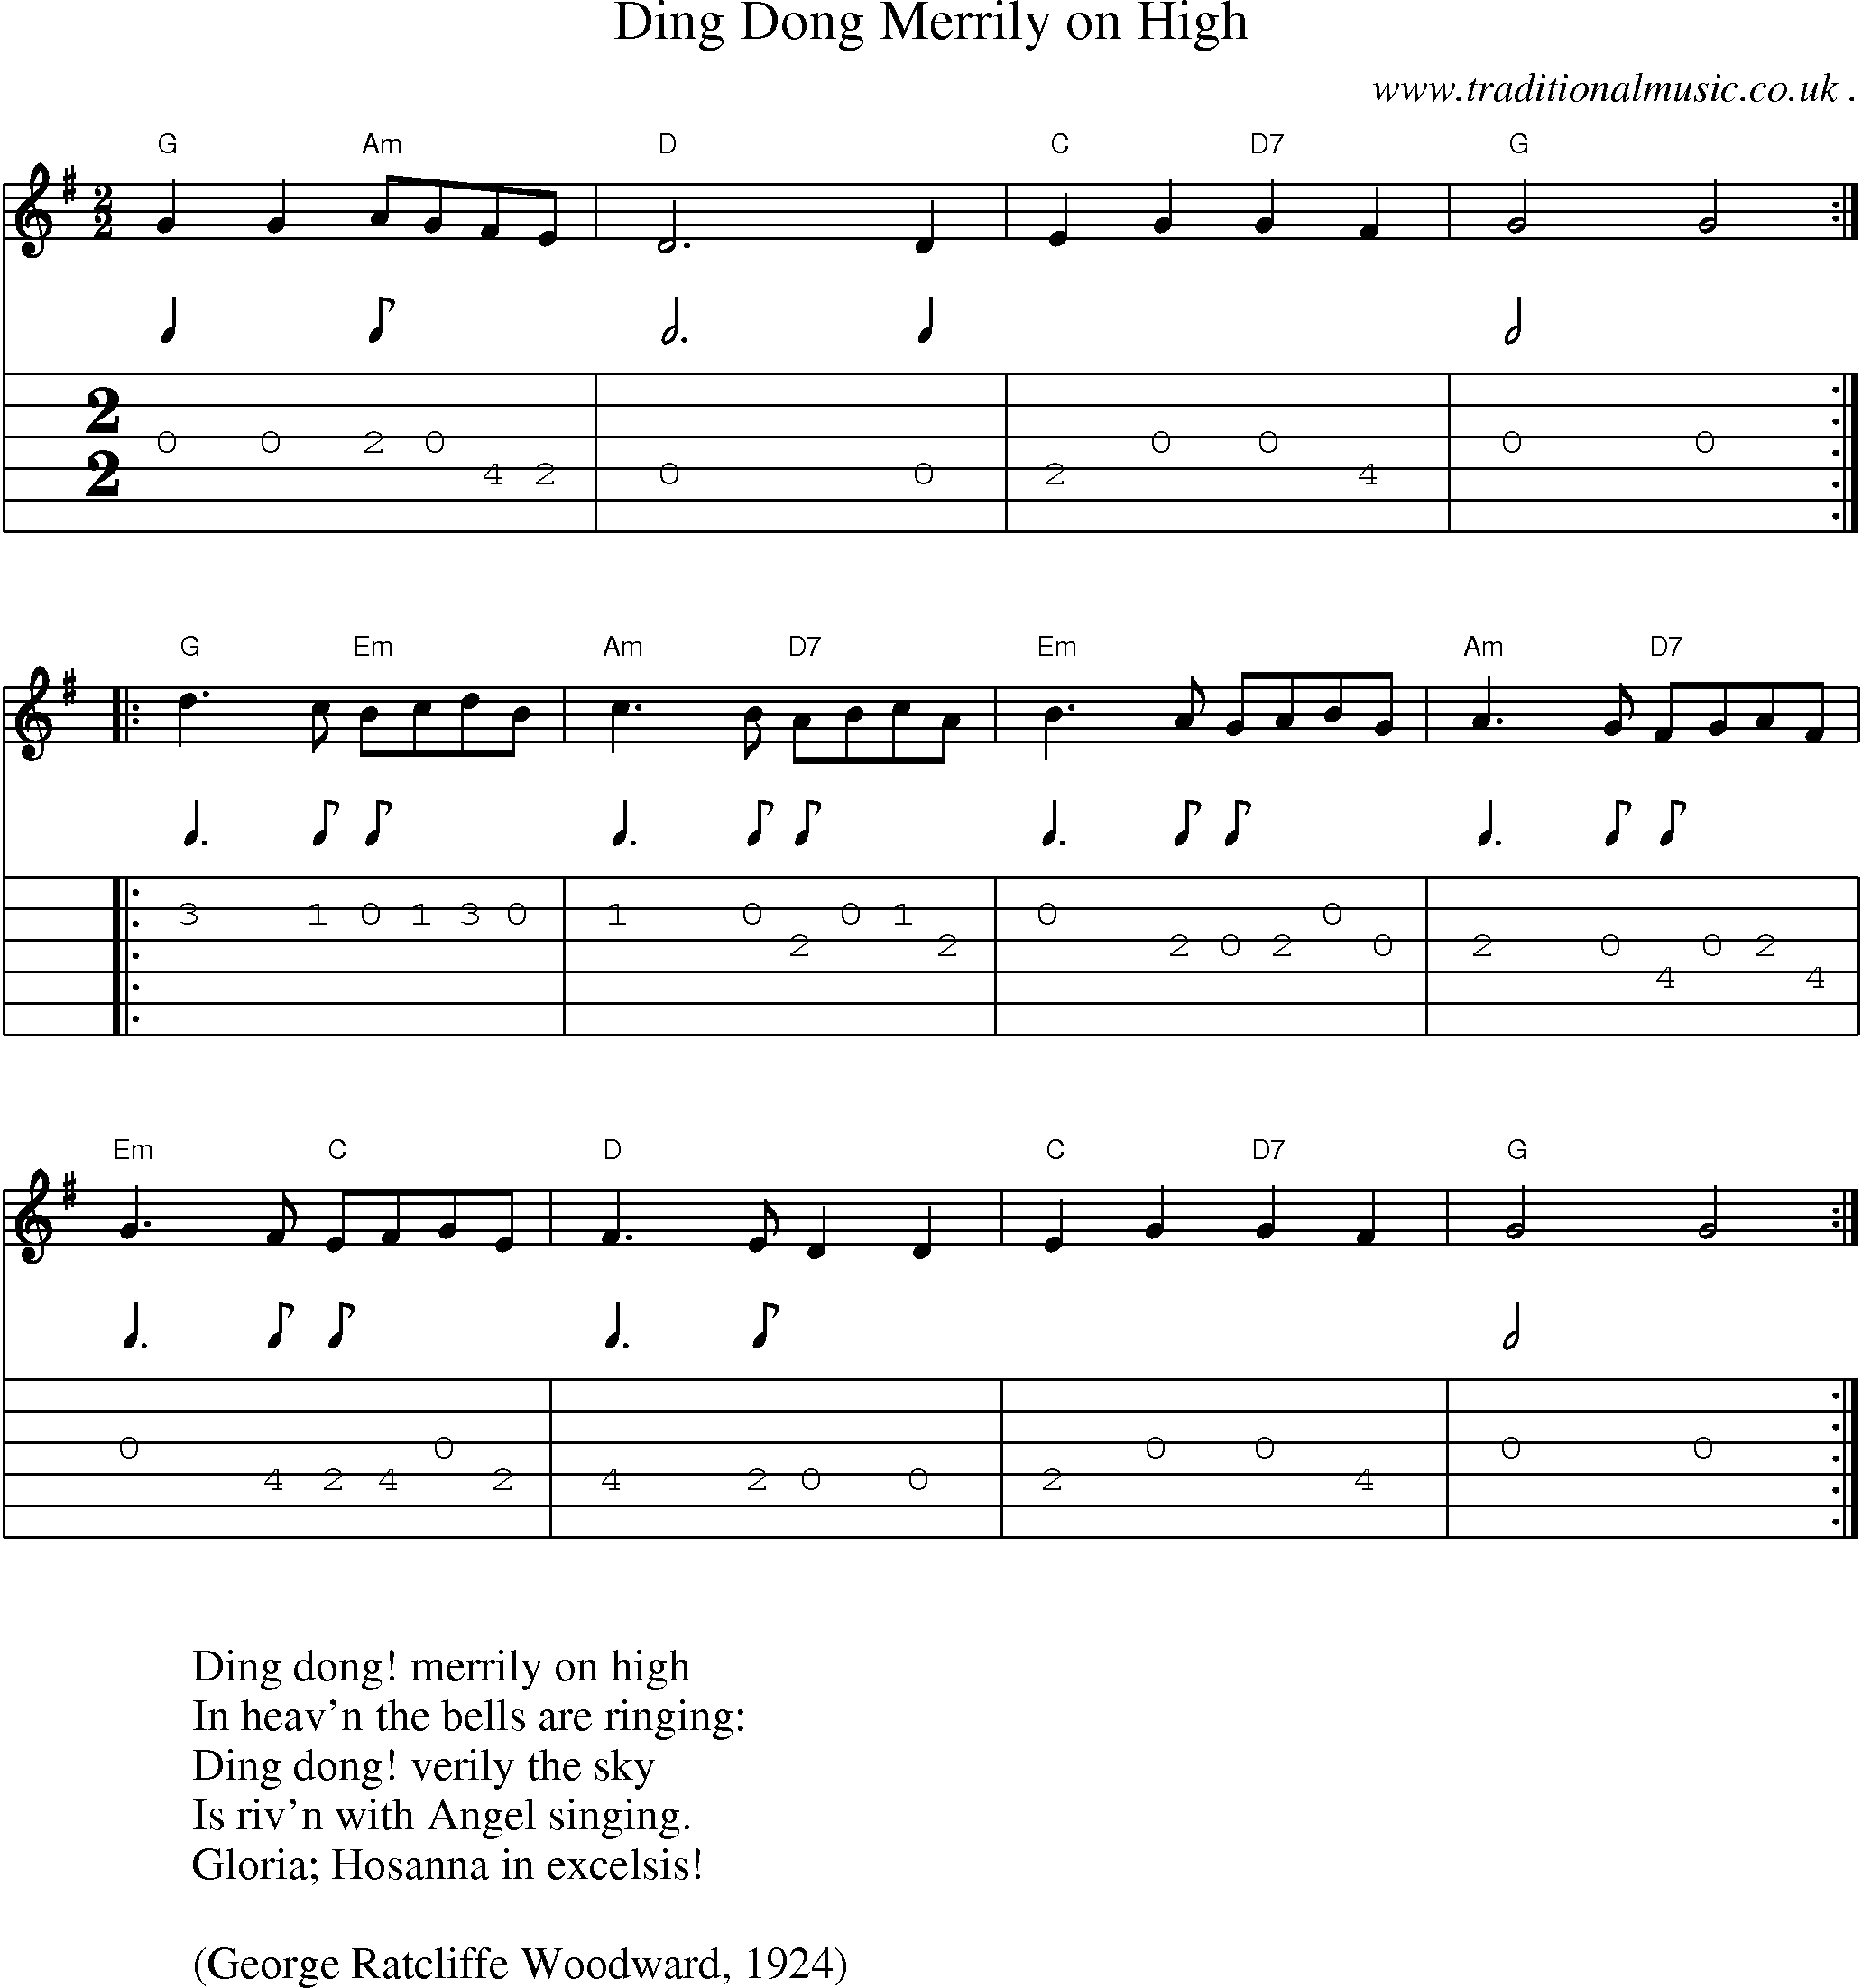 Music Score and Guitar Tabs for Ding Dong Merrily on High